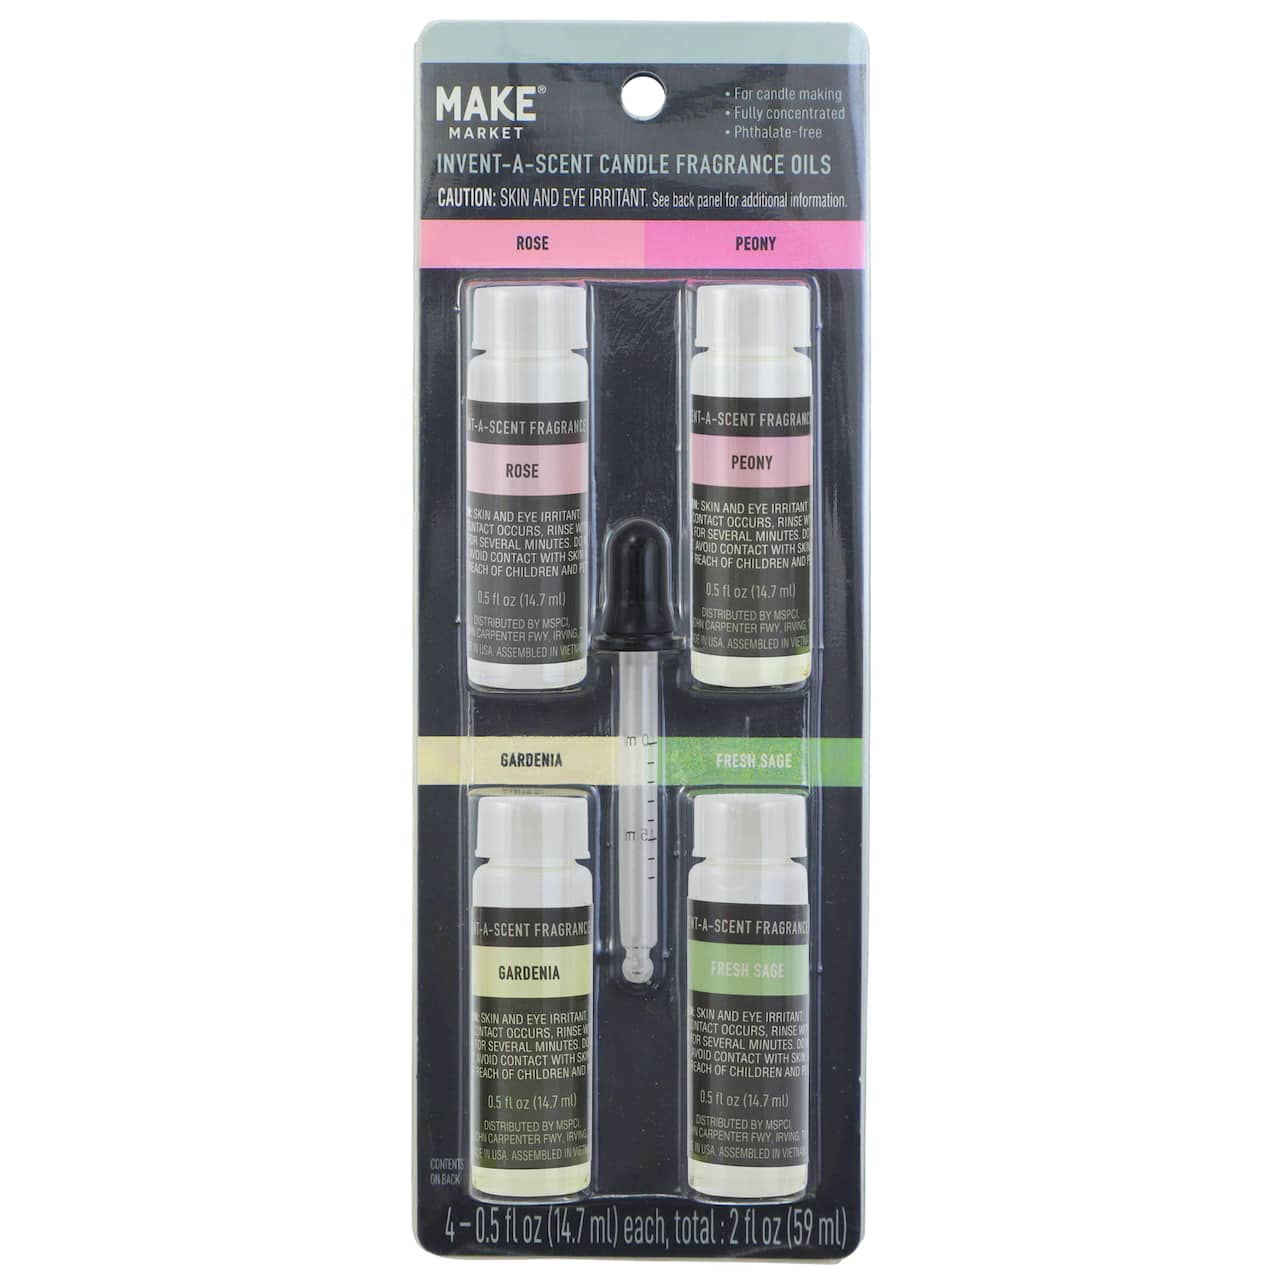 Invent-a-Scent Garden Candle Fragrance Oil Set by Make Market®